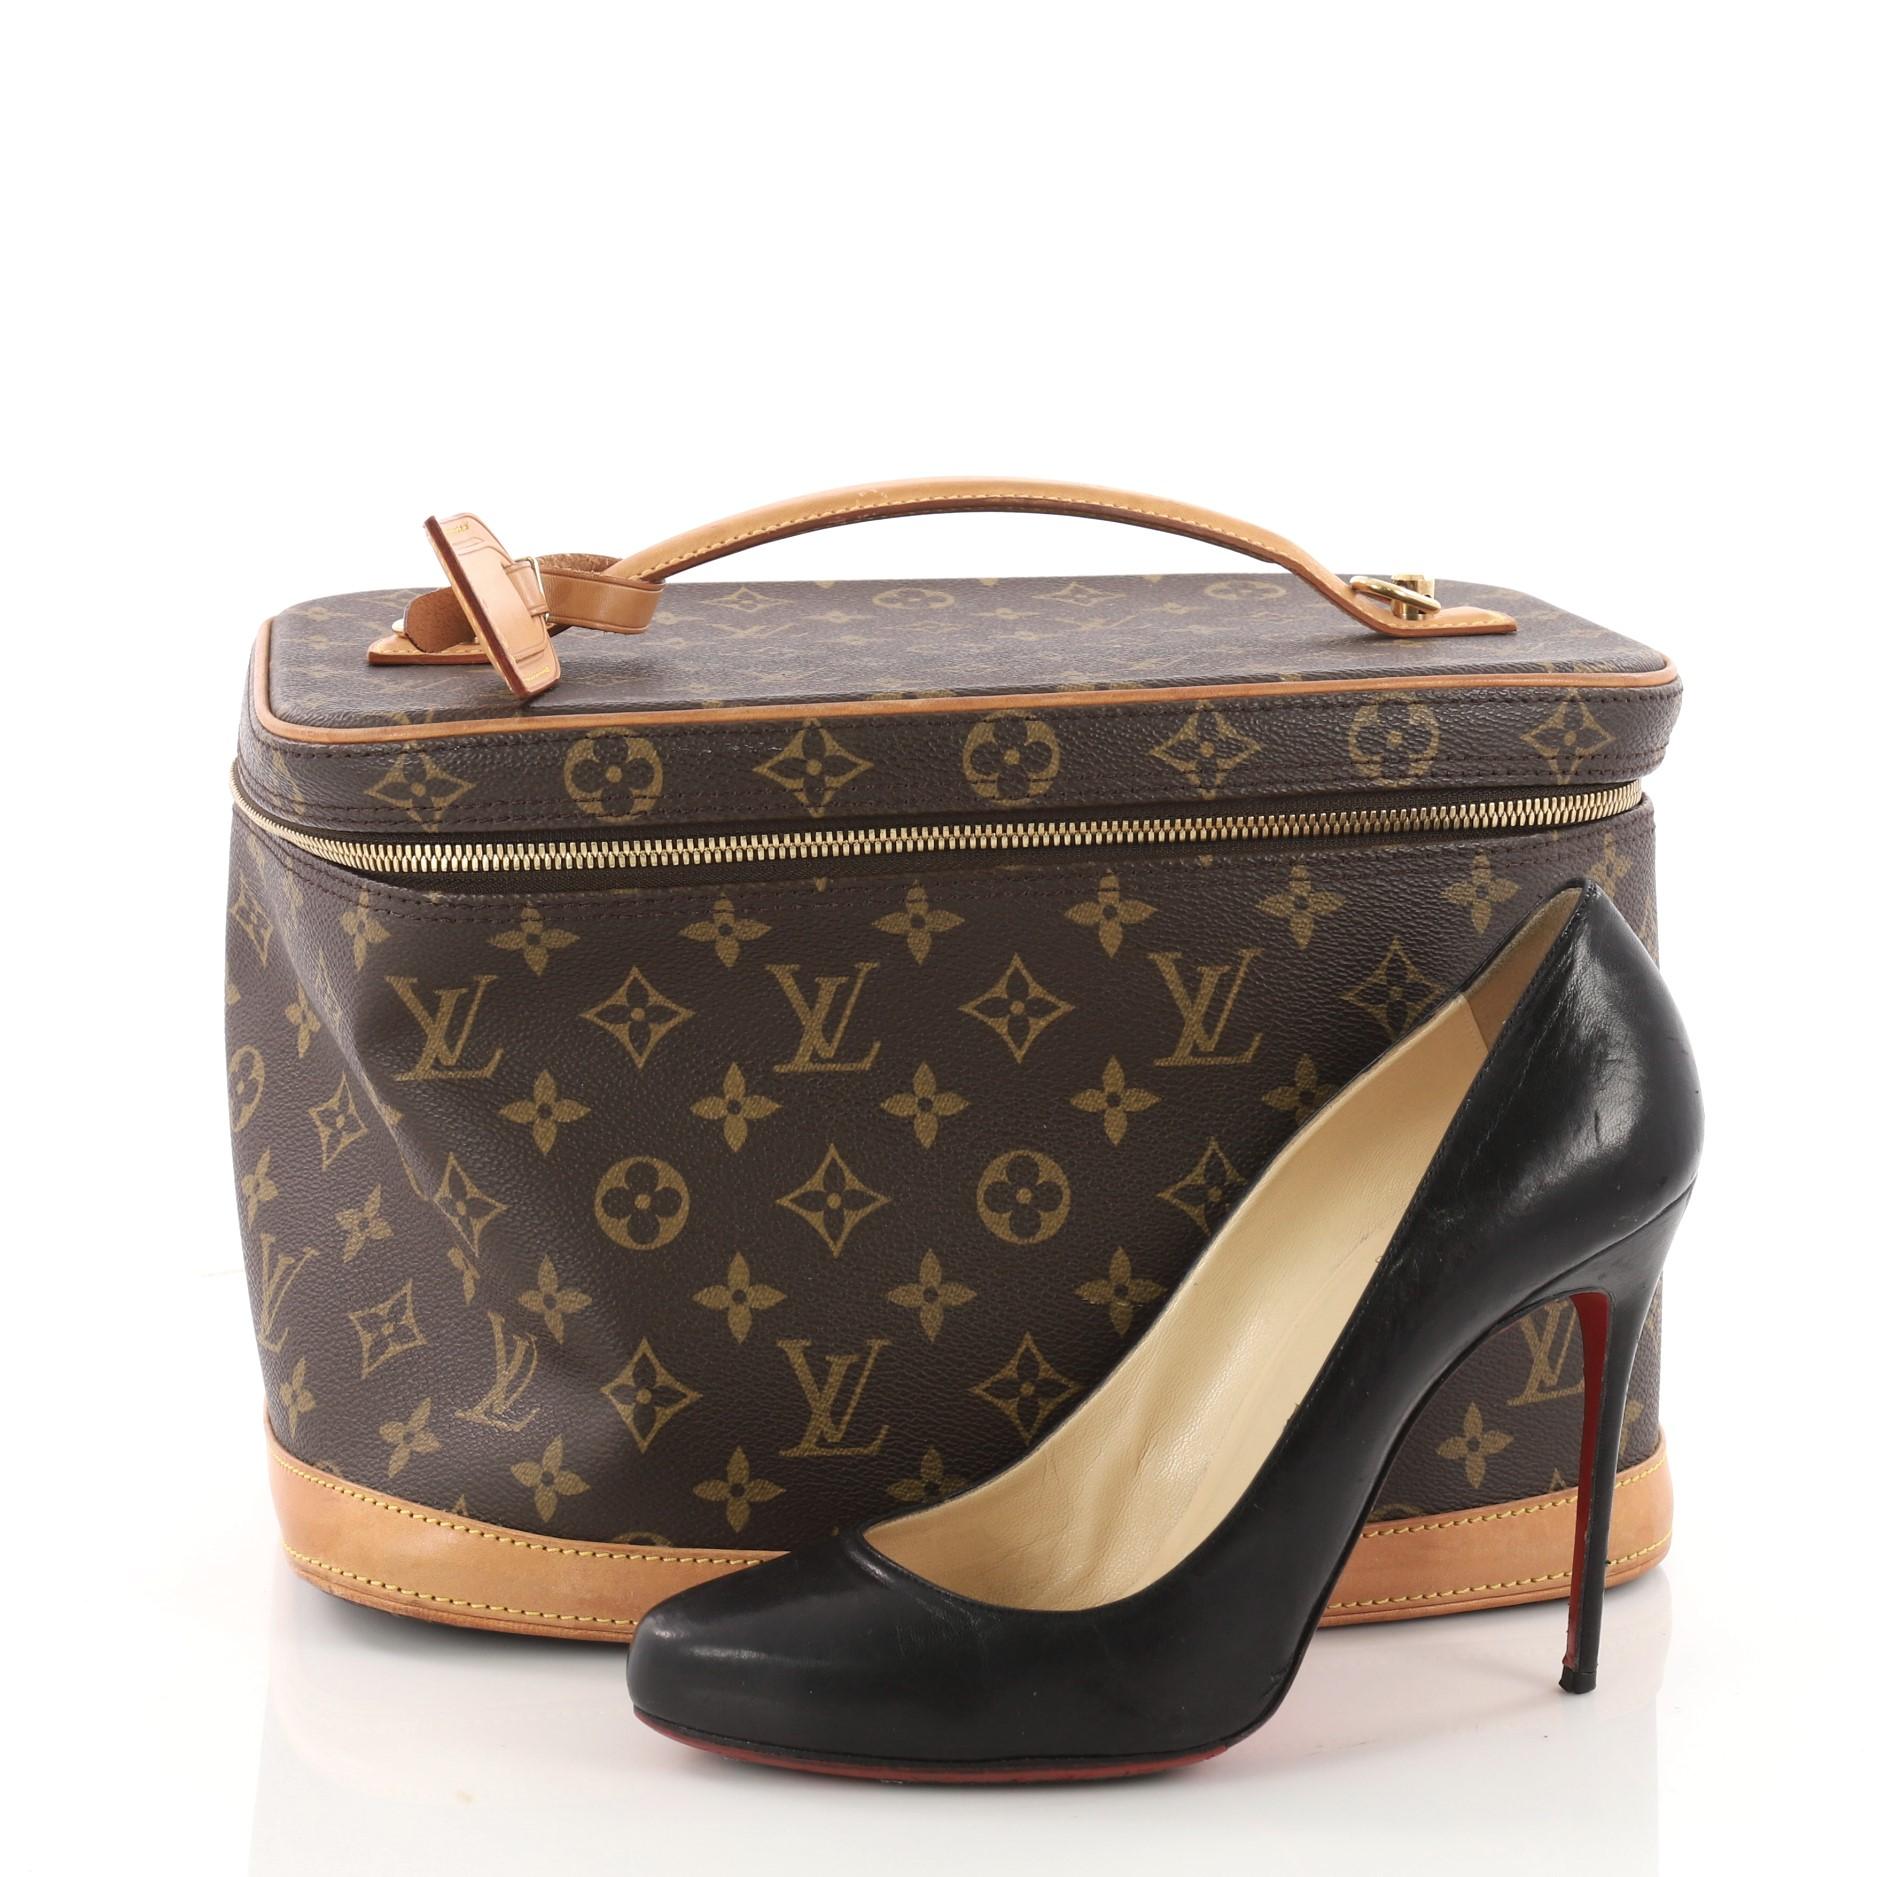 This authentic Louis Vuitton Nice Train Case Monogram Canvas is a perfect travel companion for an on-the-go fashionista. Crafted from brown monogram coated canvas, this boxy travel bag features vachetta leather flat handle and trims and gold-tone